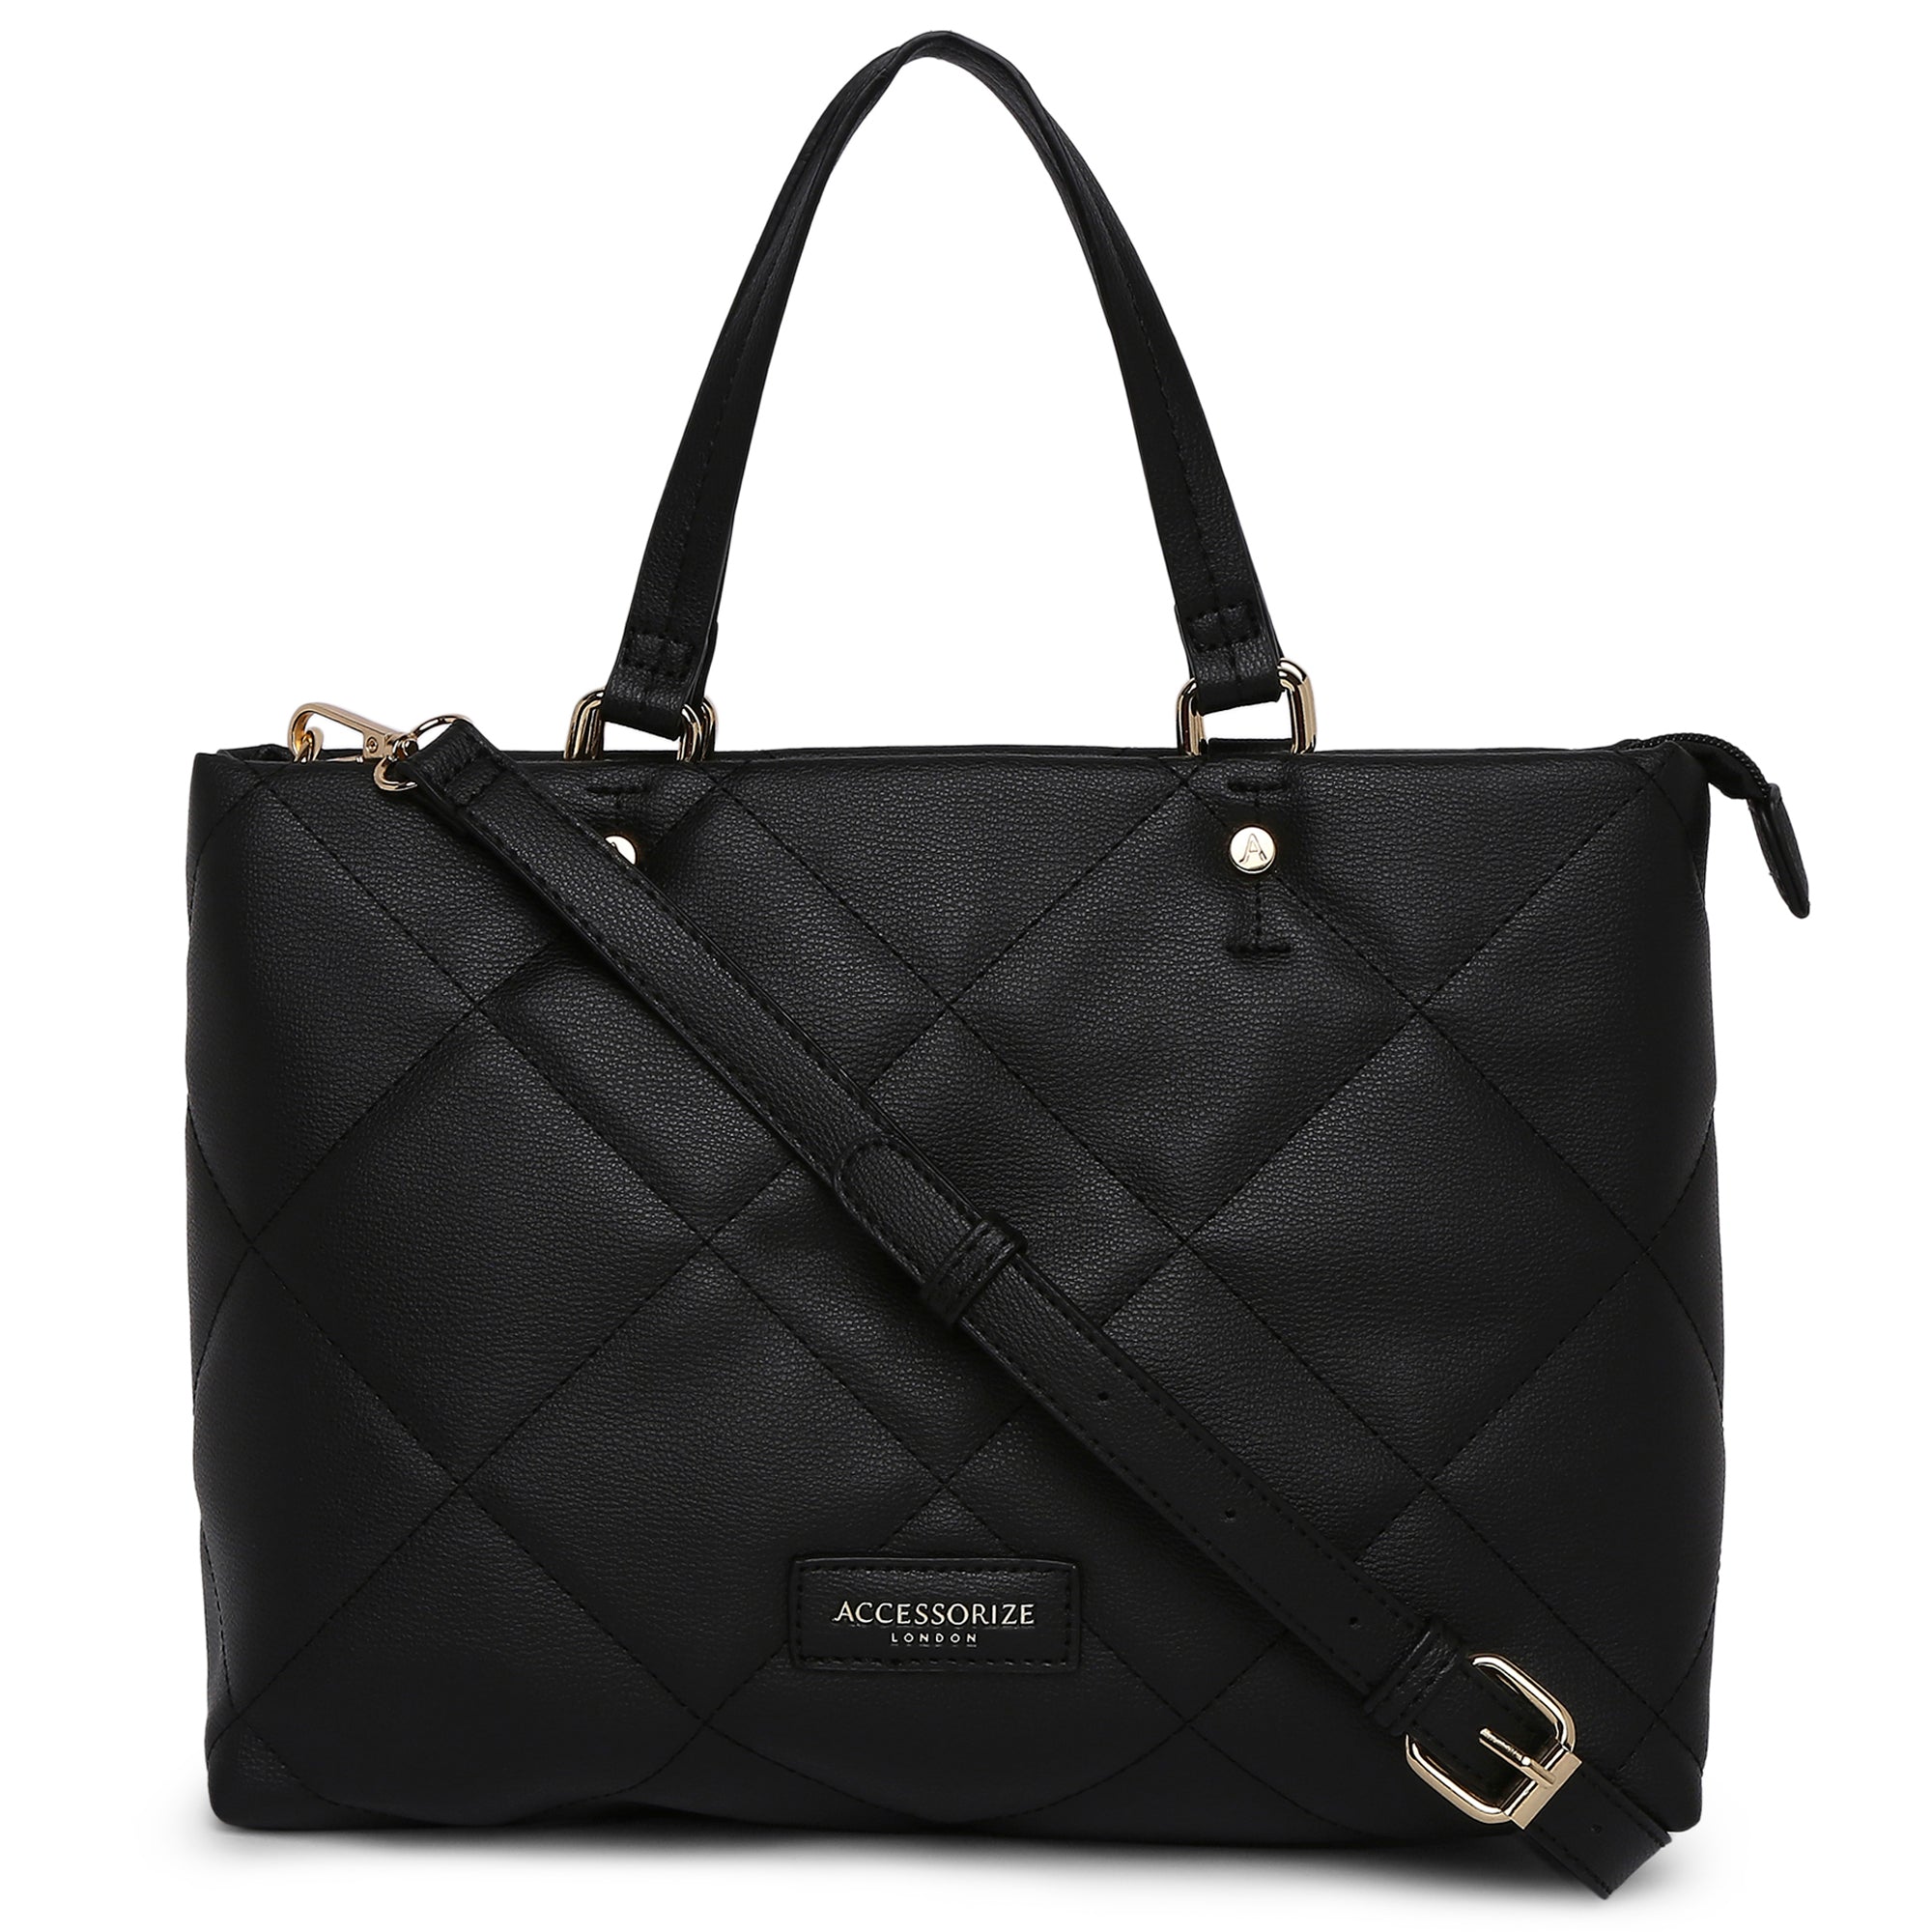 Accessorize London Women's Faux Leather Black Kayleigh Quilted Handheld Bag